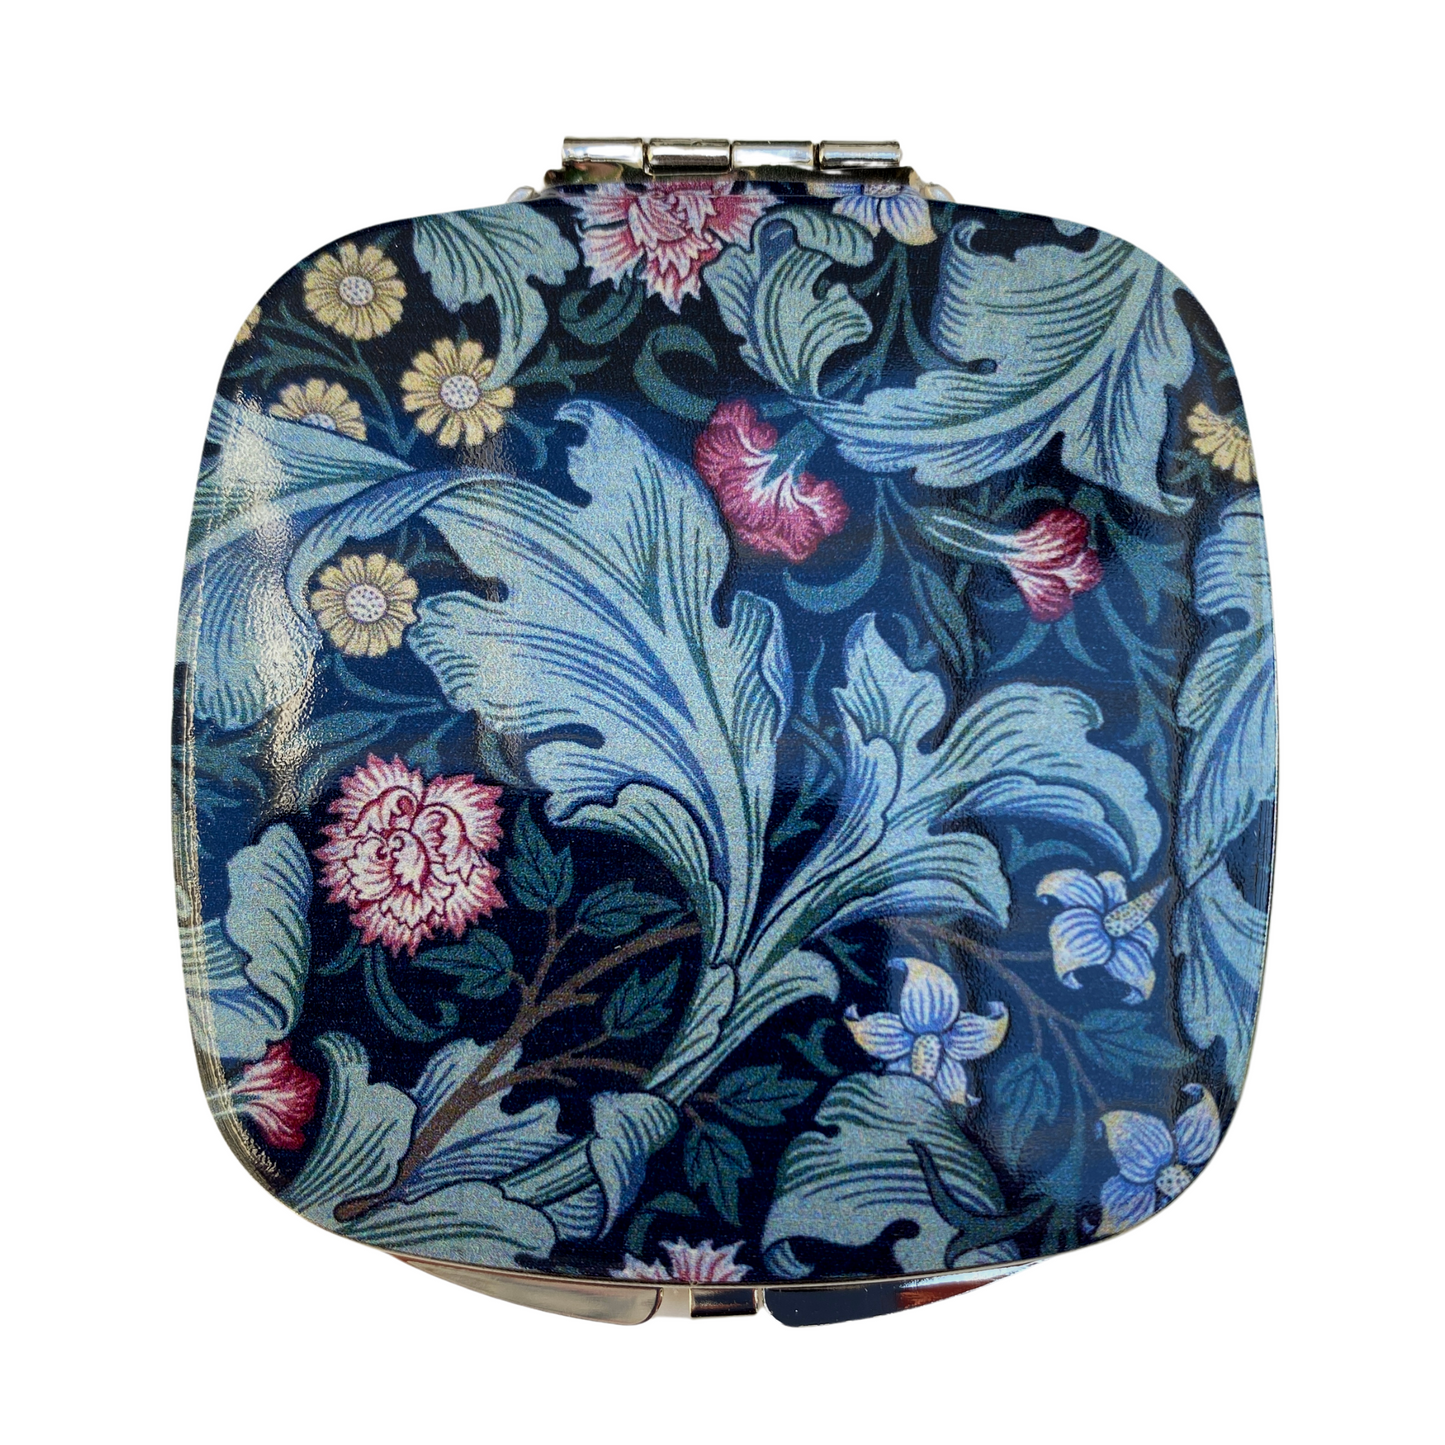 Purse Mirror William Morris Art, Black Background, Green Leaves, Colorful Flowers